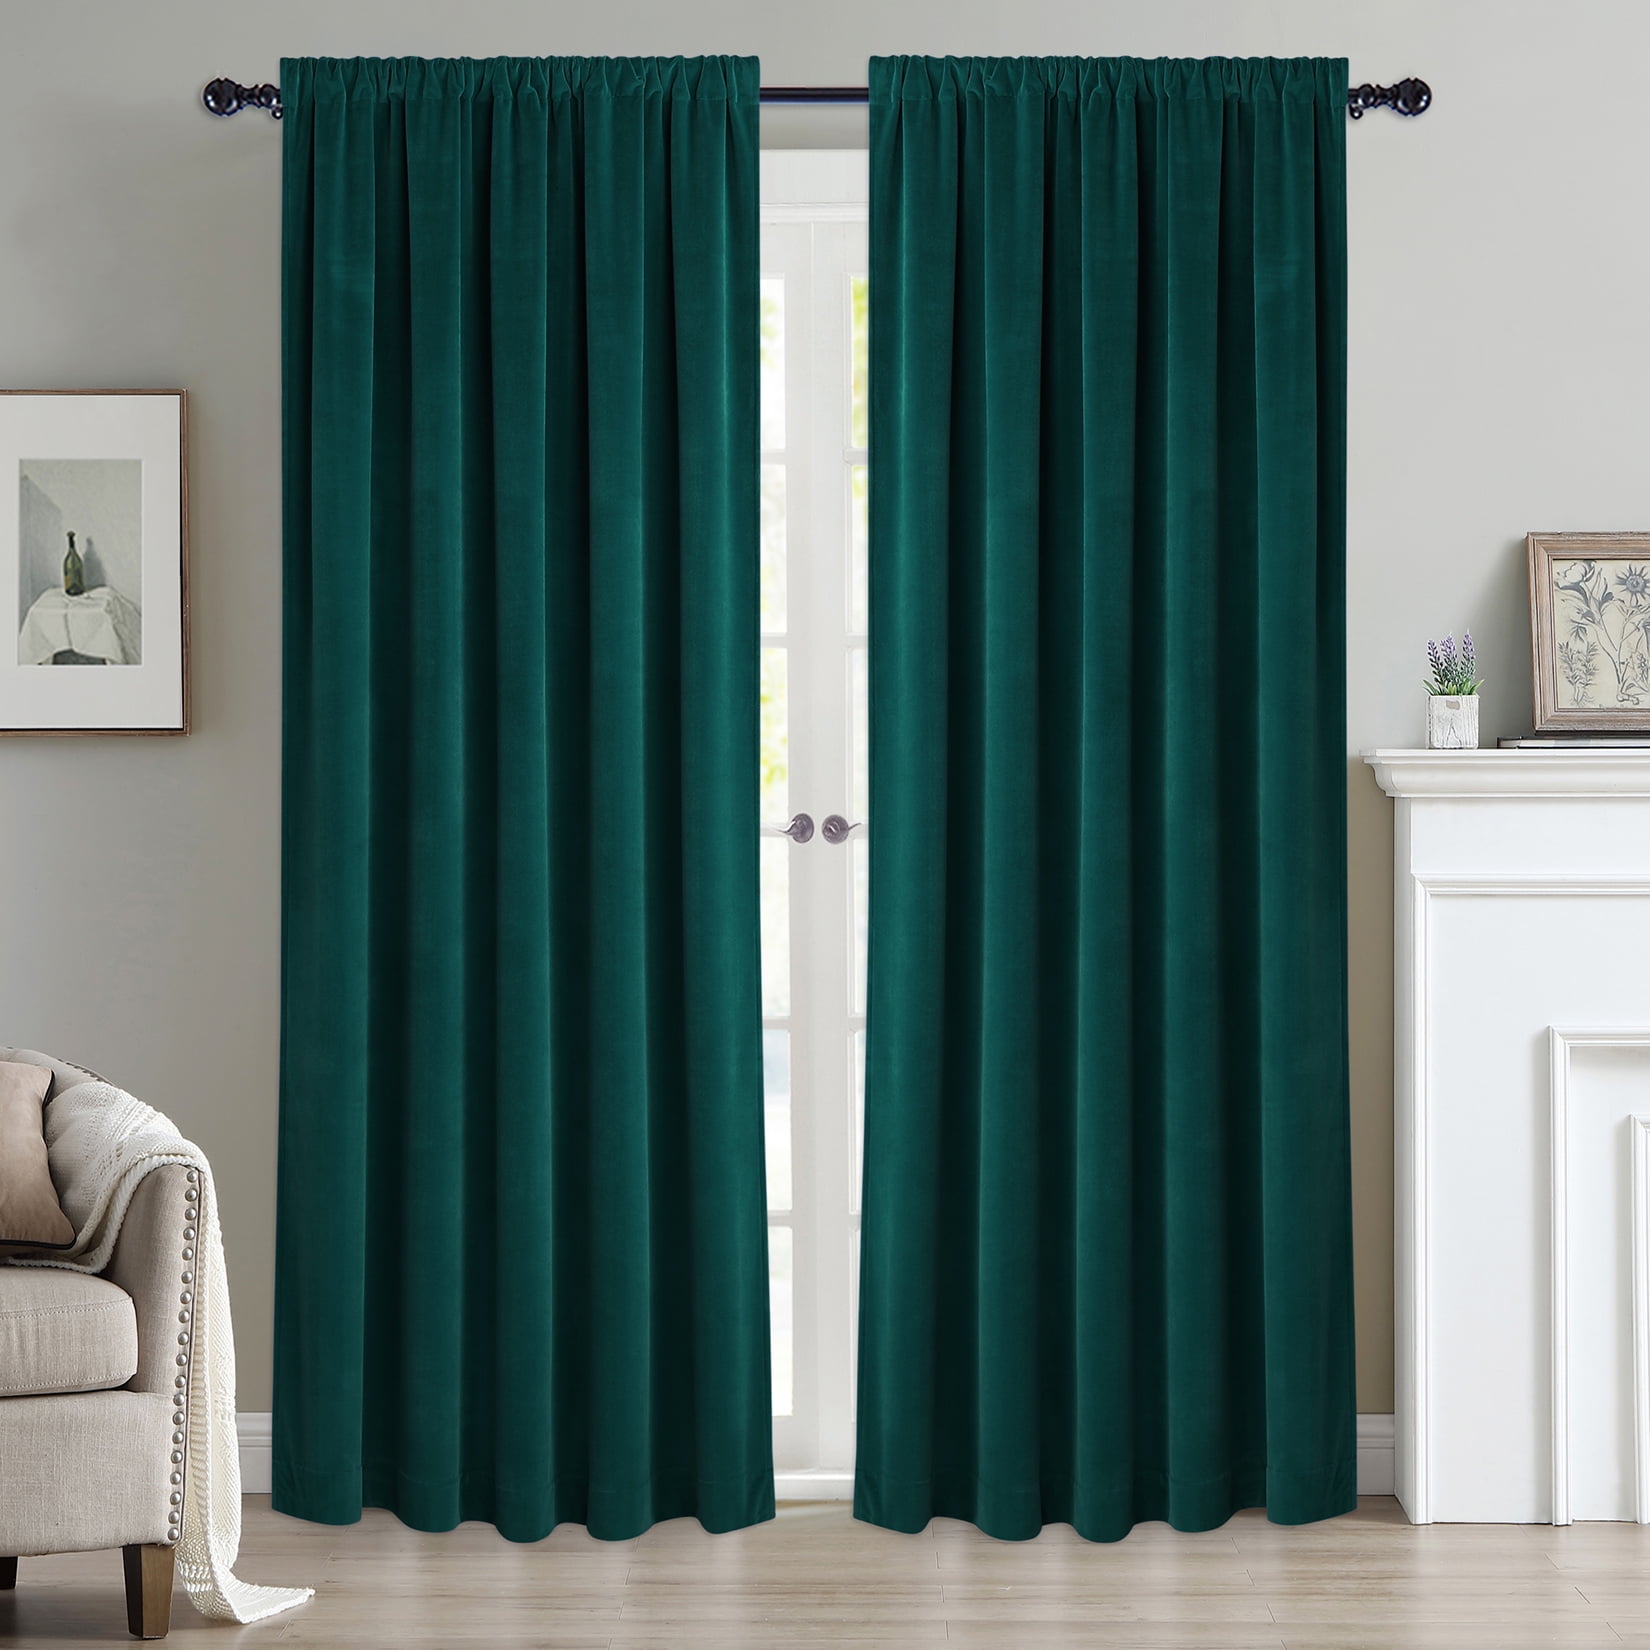 Long Thick Green Velvet Curtains PAIR of Eyelet Ring Top Lined Ready Made Panels 